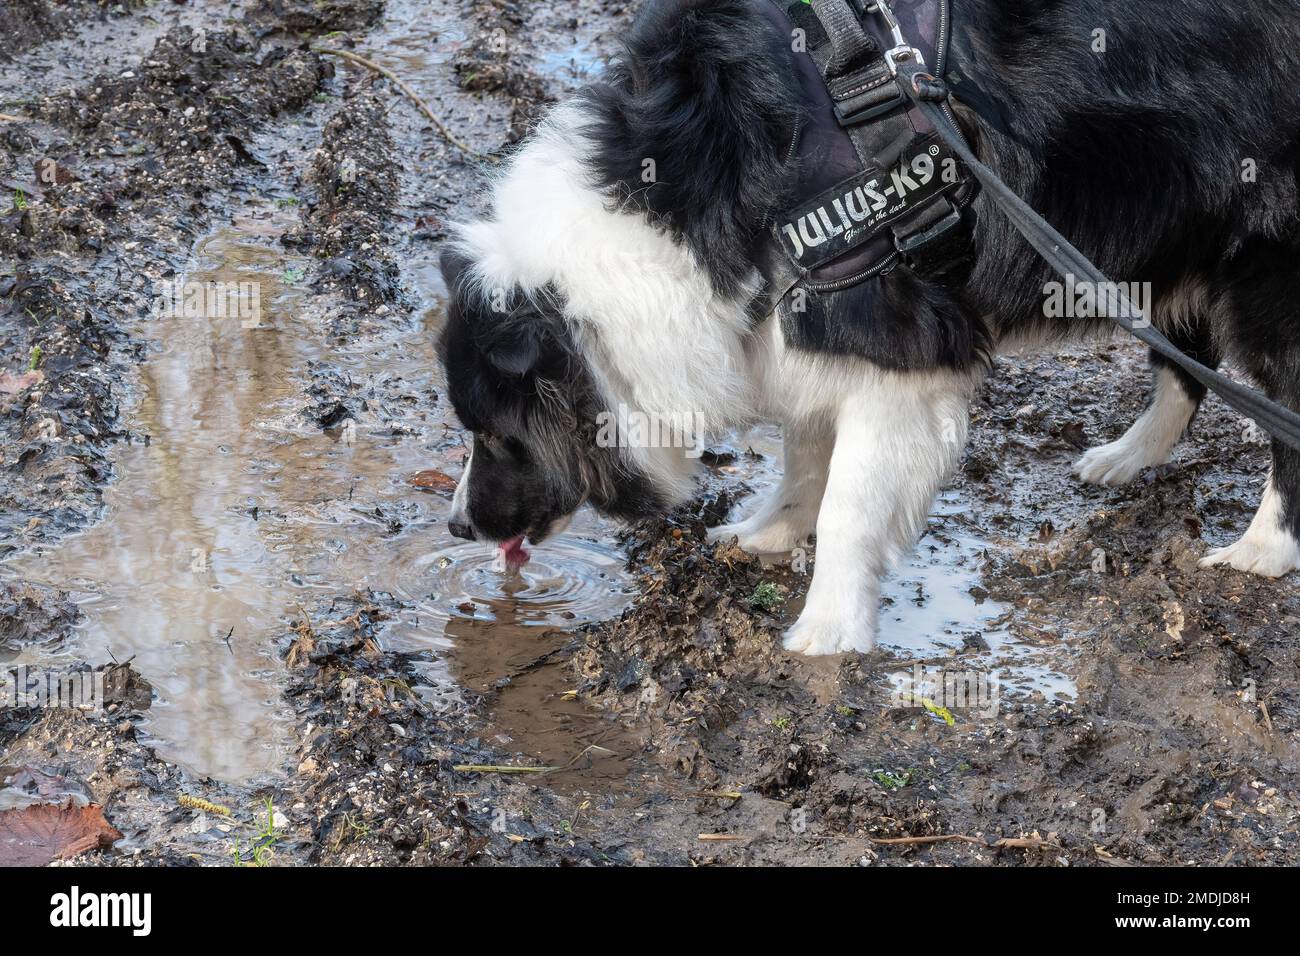 Border collie dog drinking water from a muddy pond Stock Photo